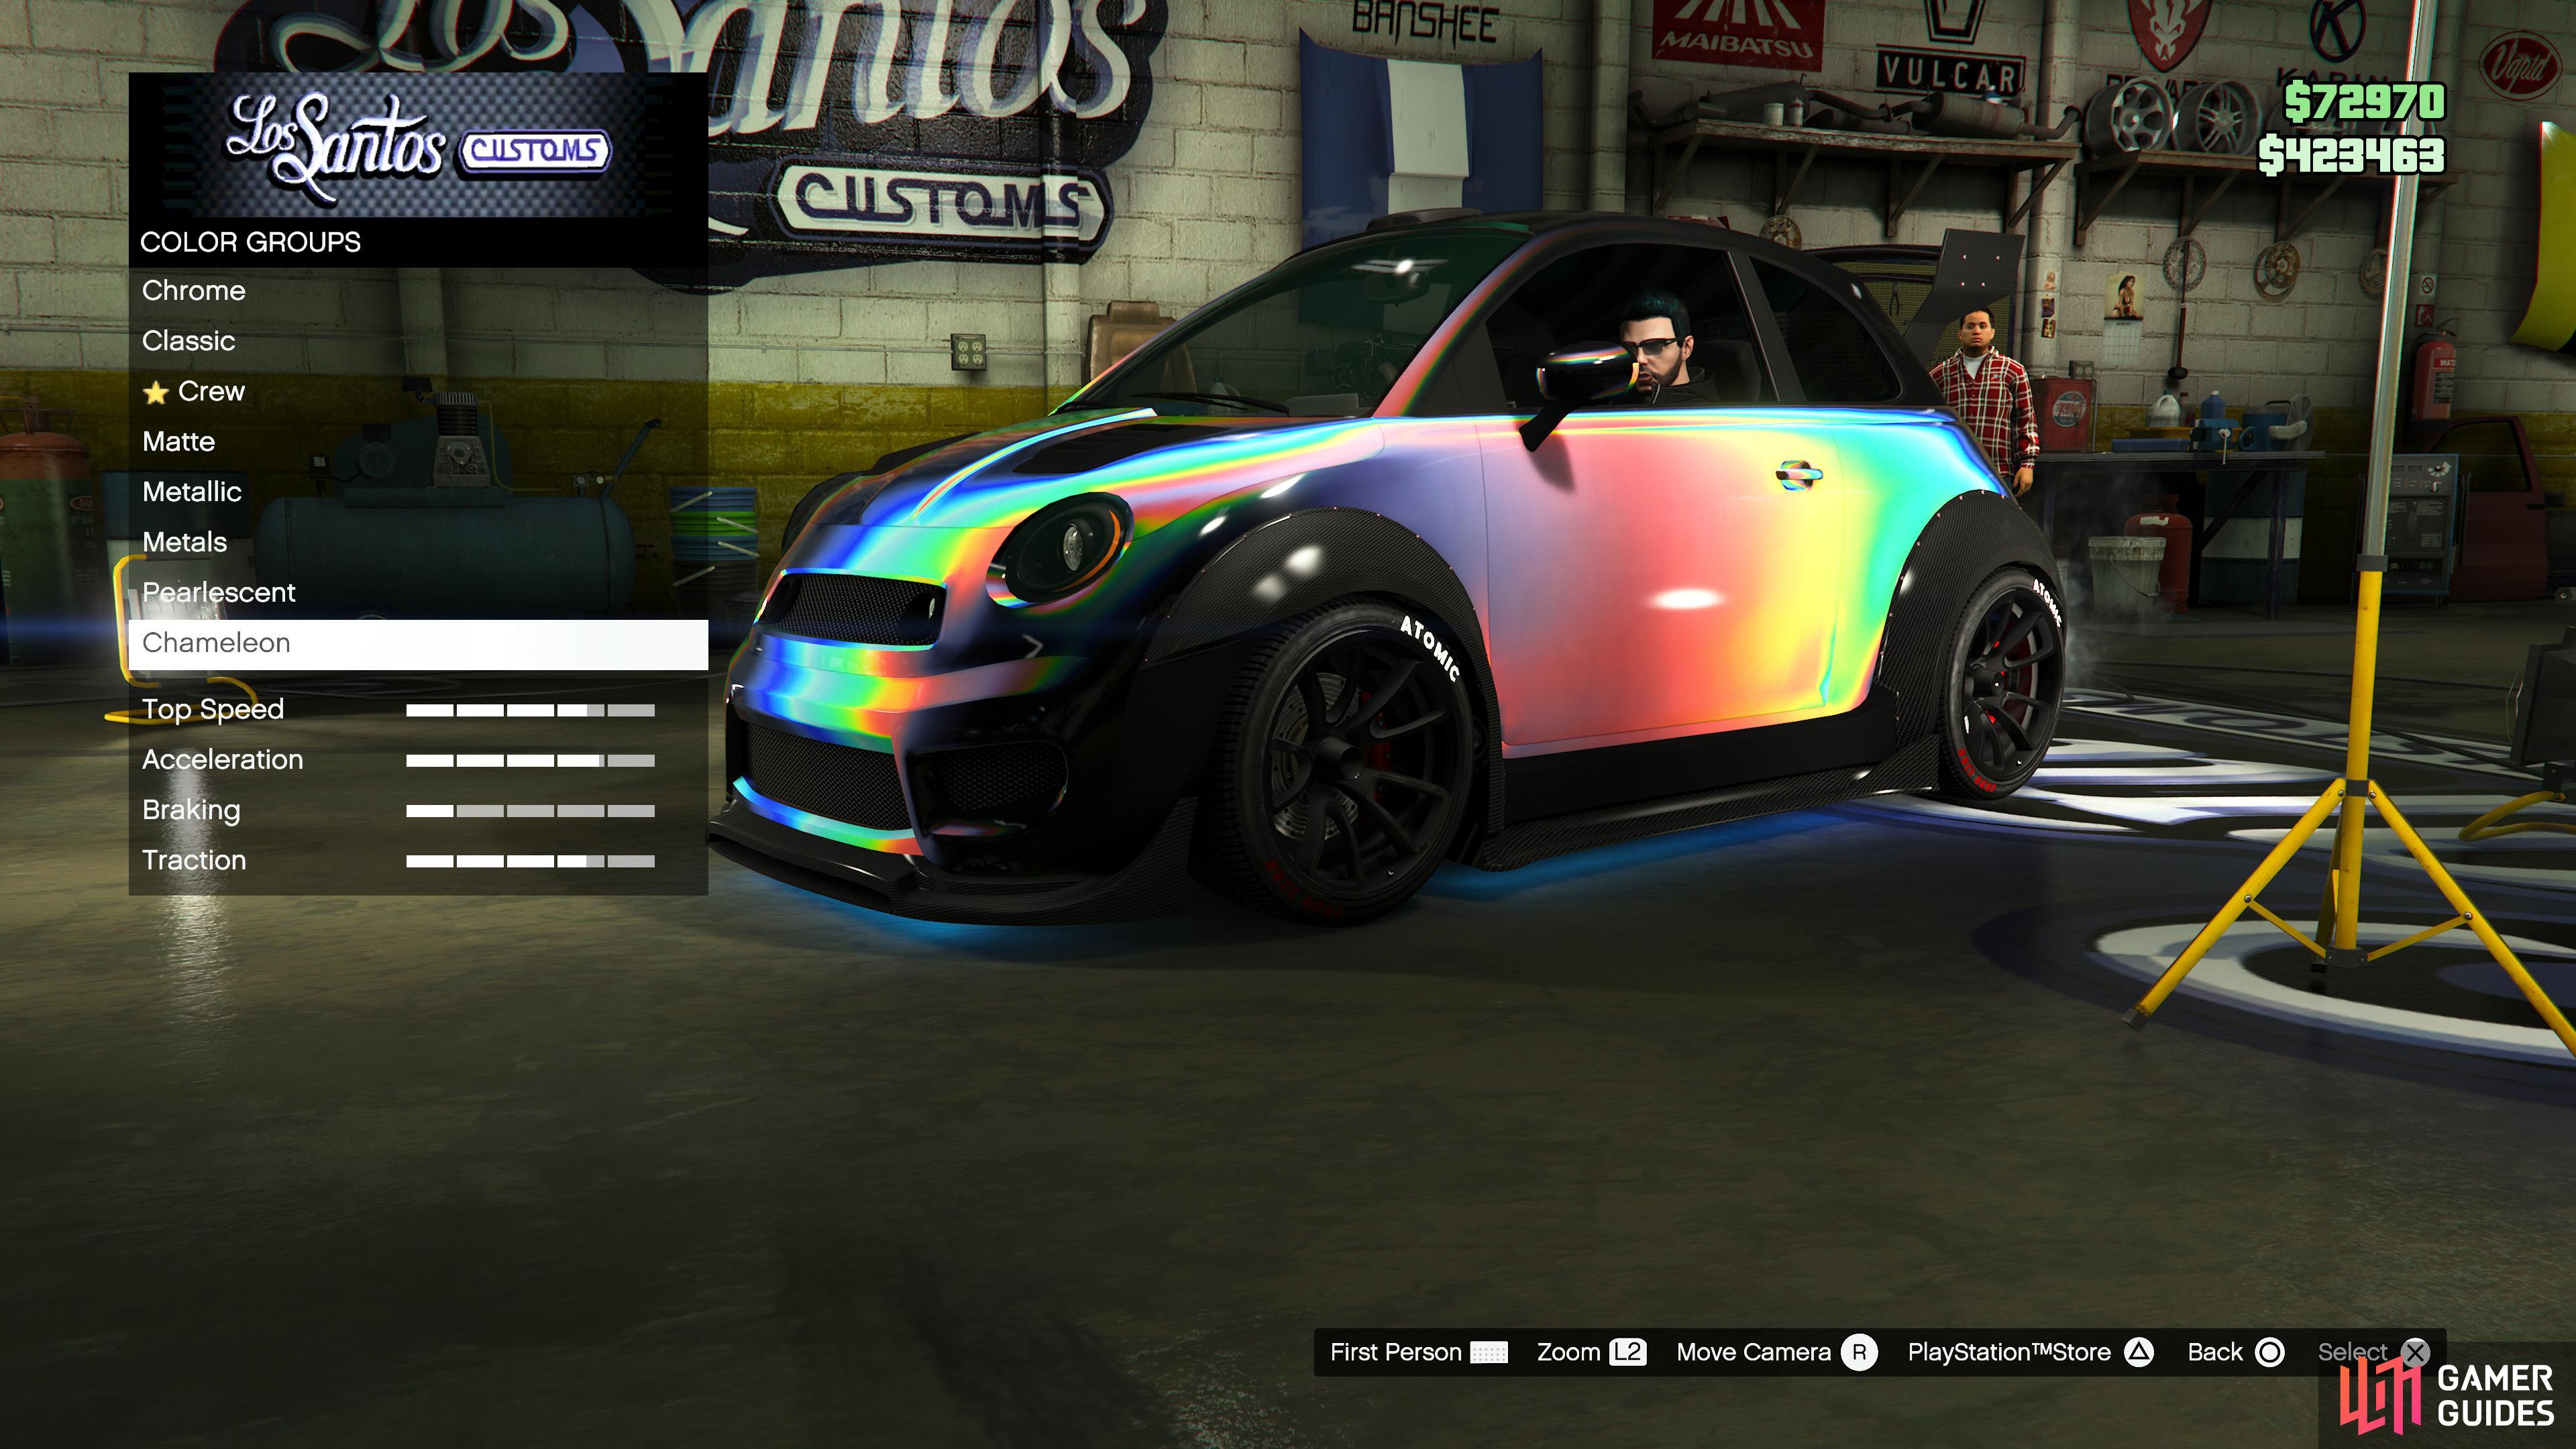 You can find the Chameleon in Los Santos Customs